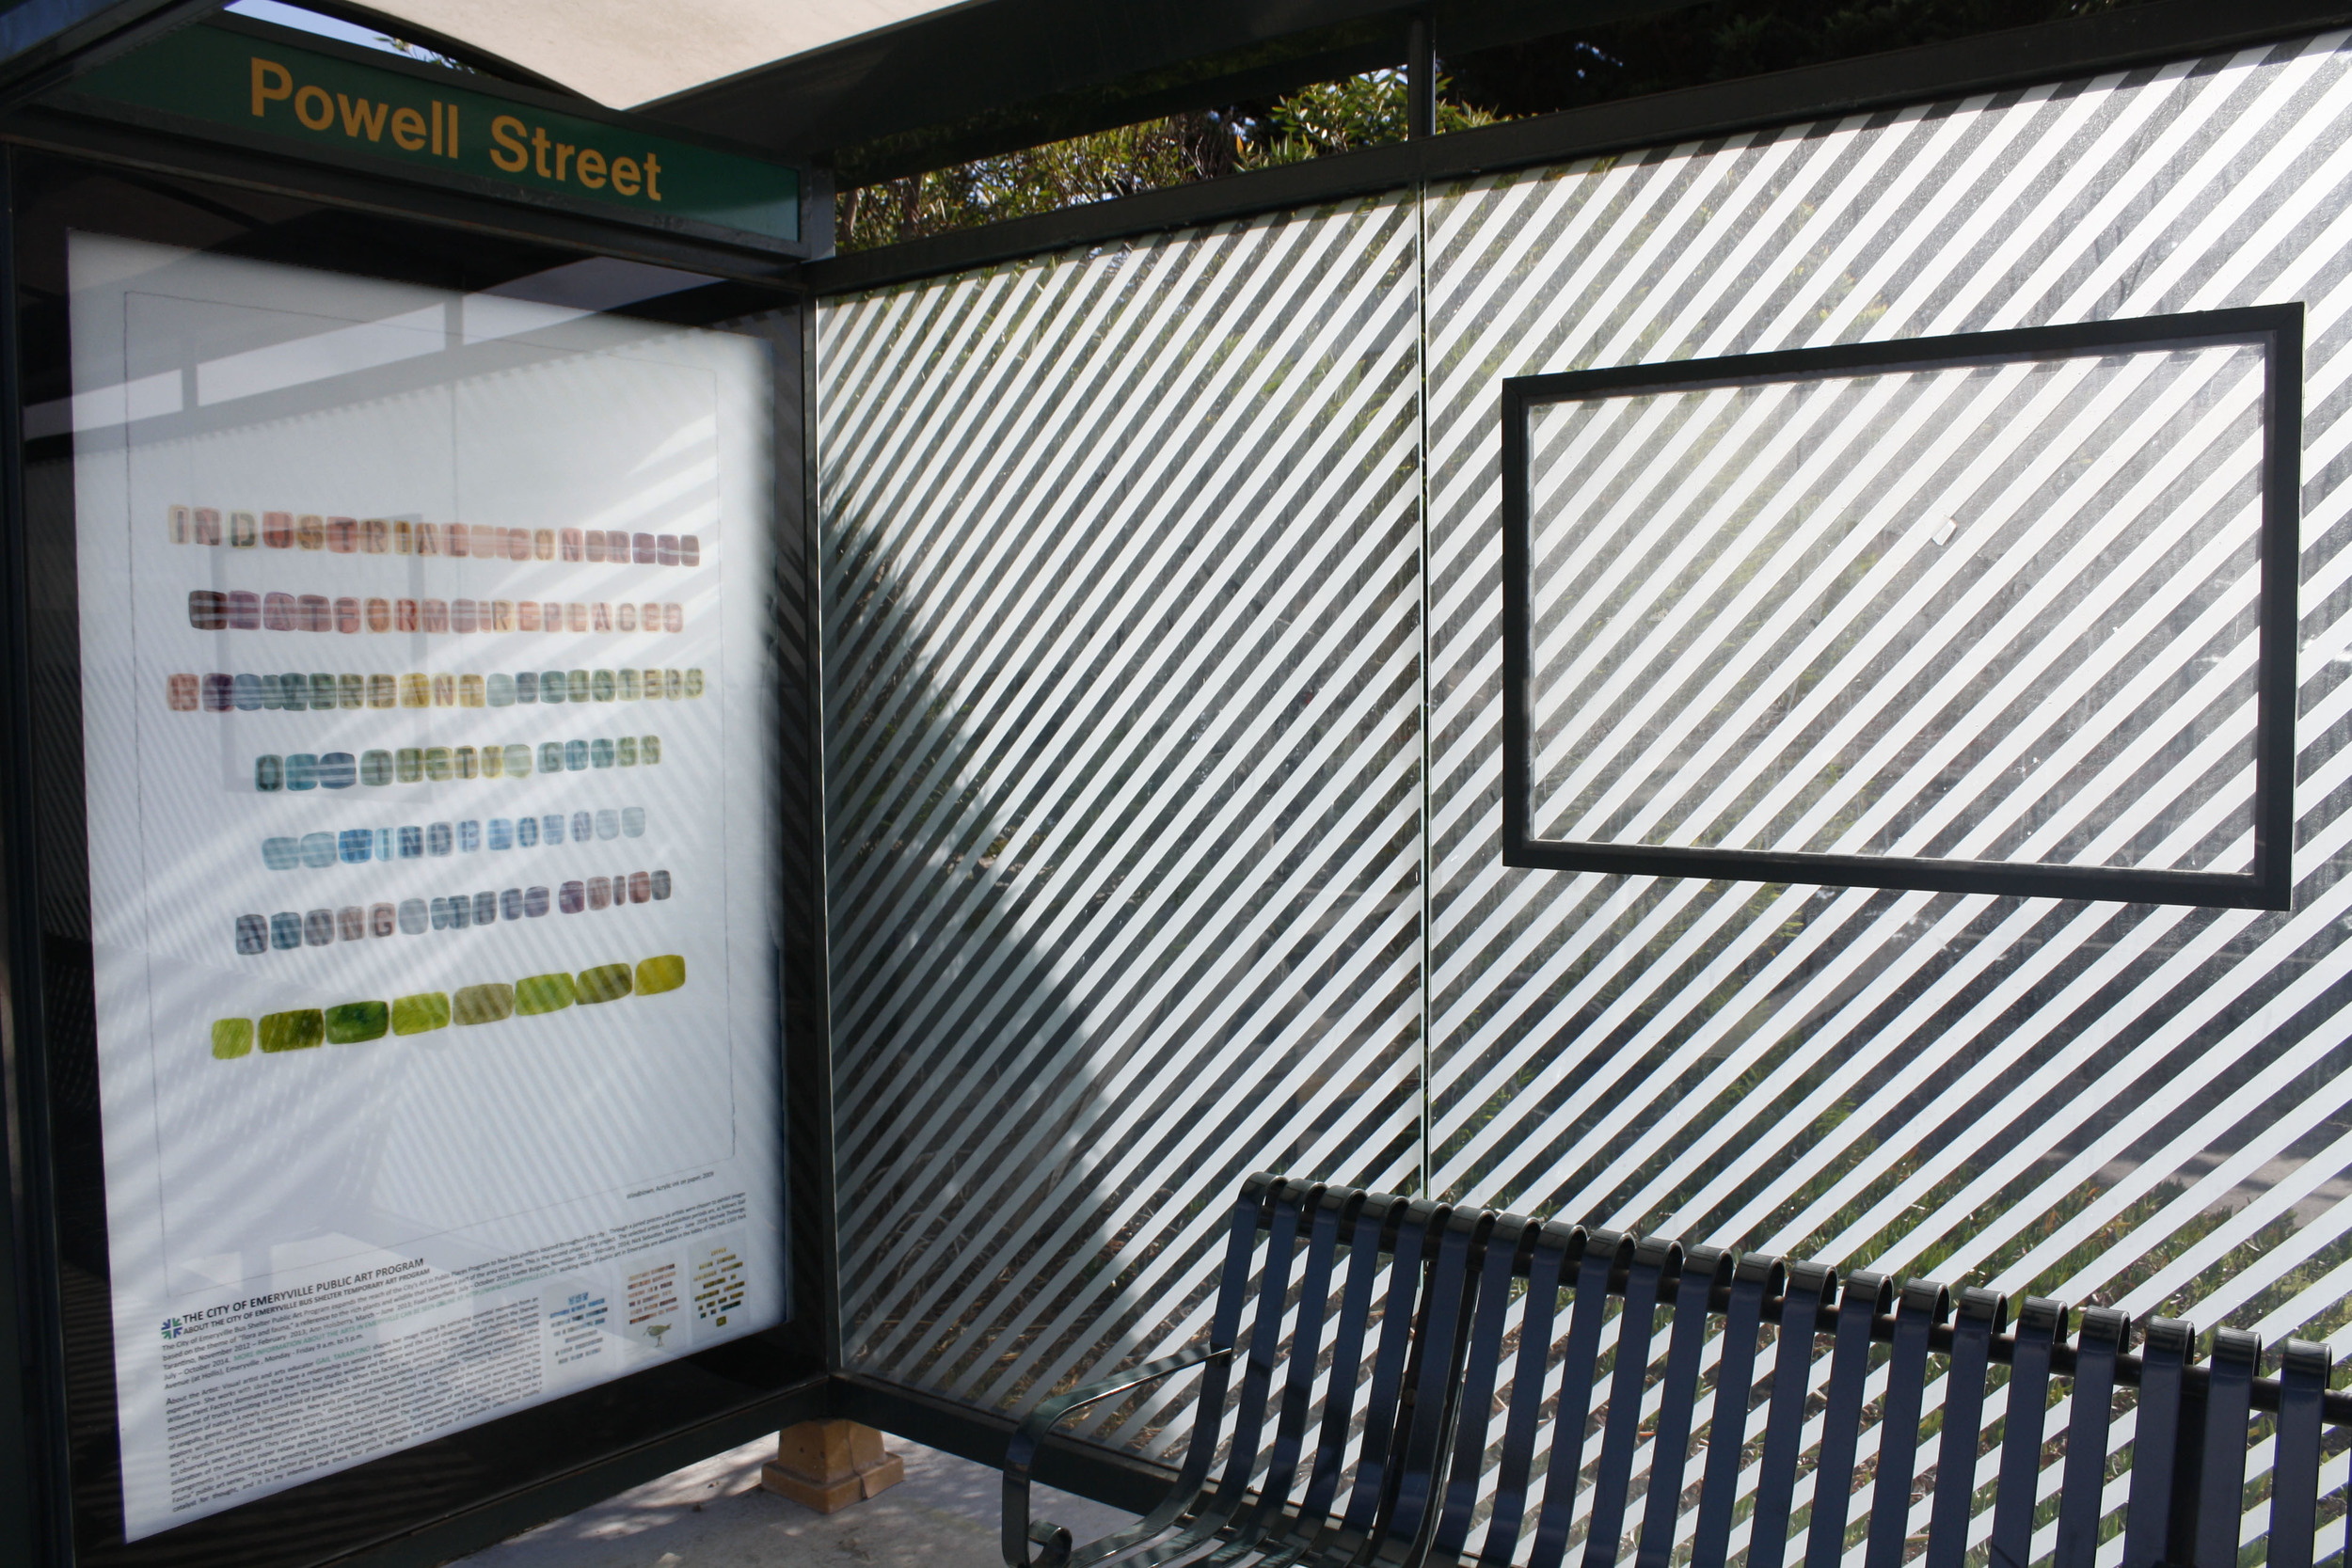 Emeryville Bus Shelter Project: Flora and Fauna